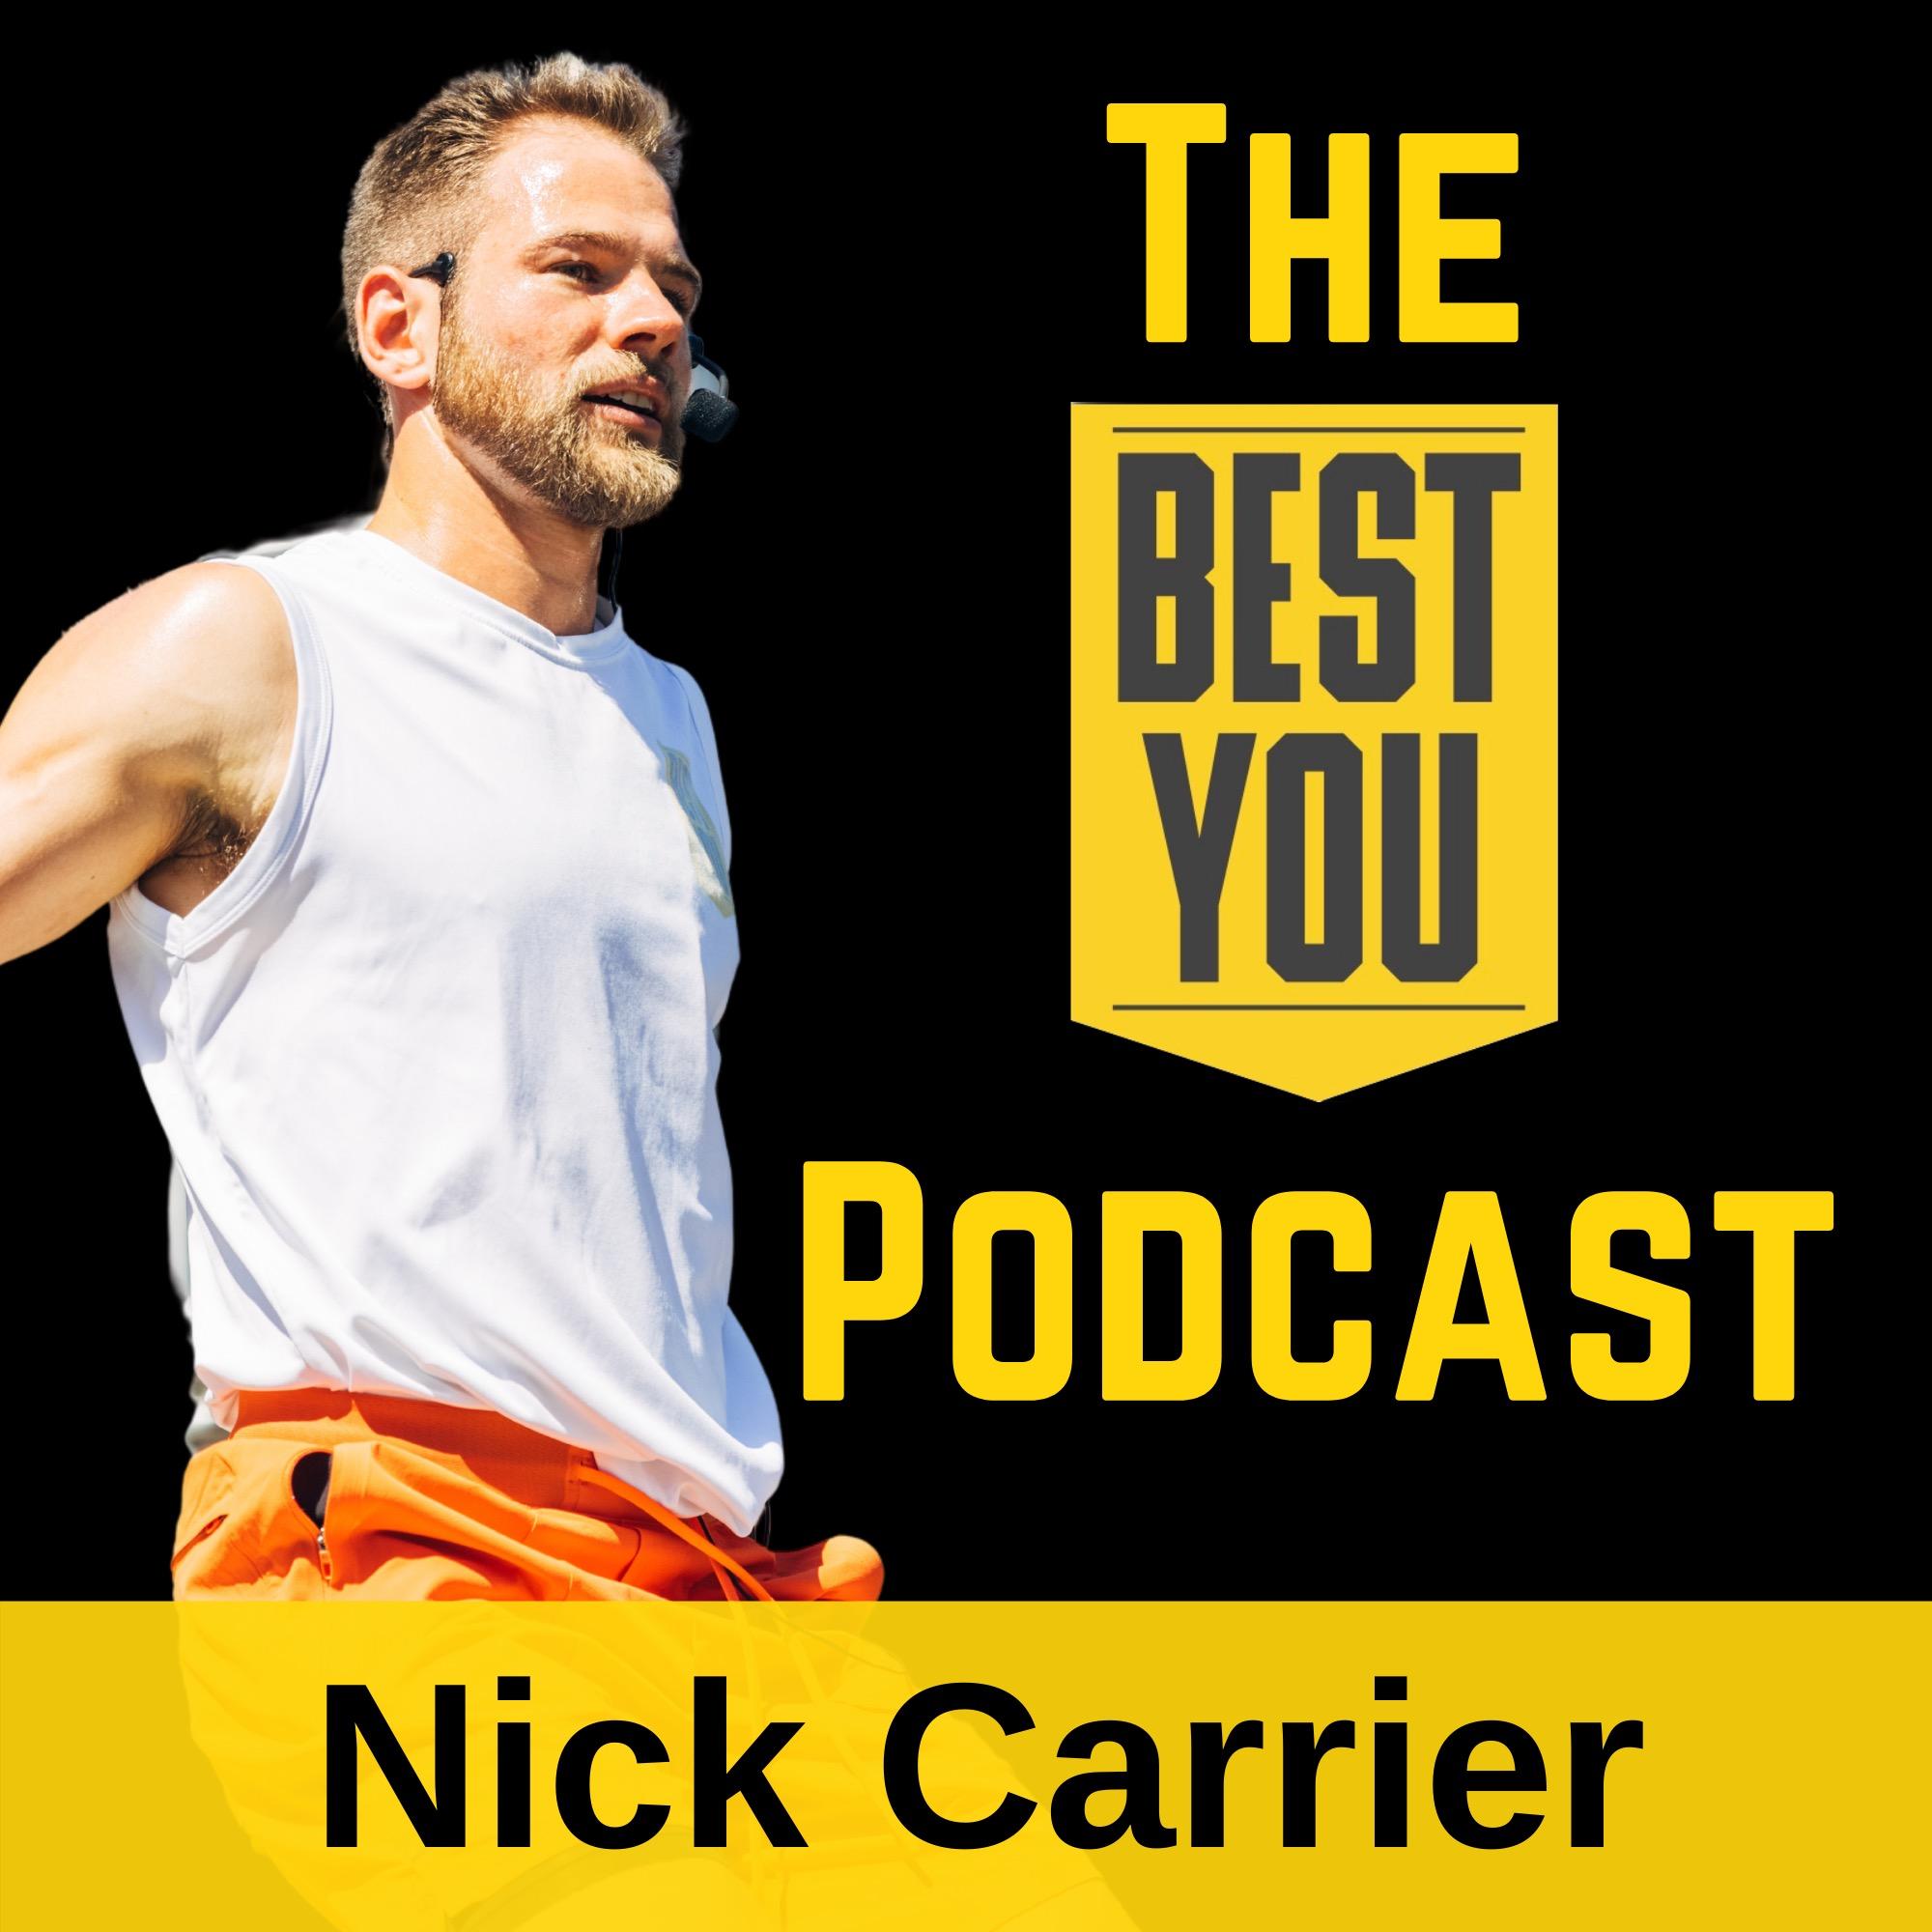 The Best You Podcast with Nick Carrier